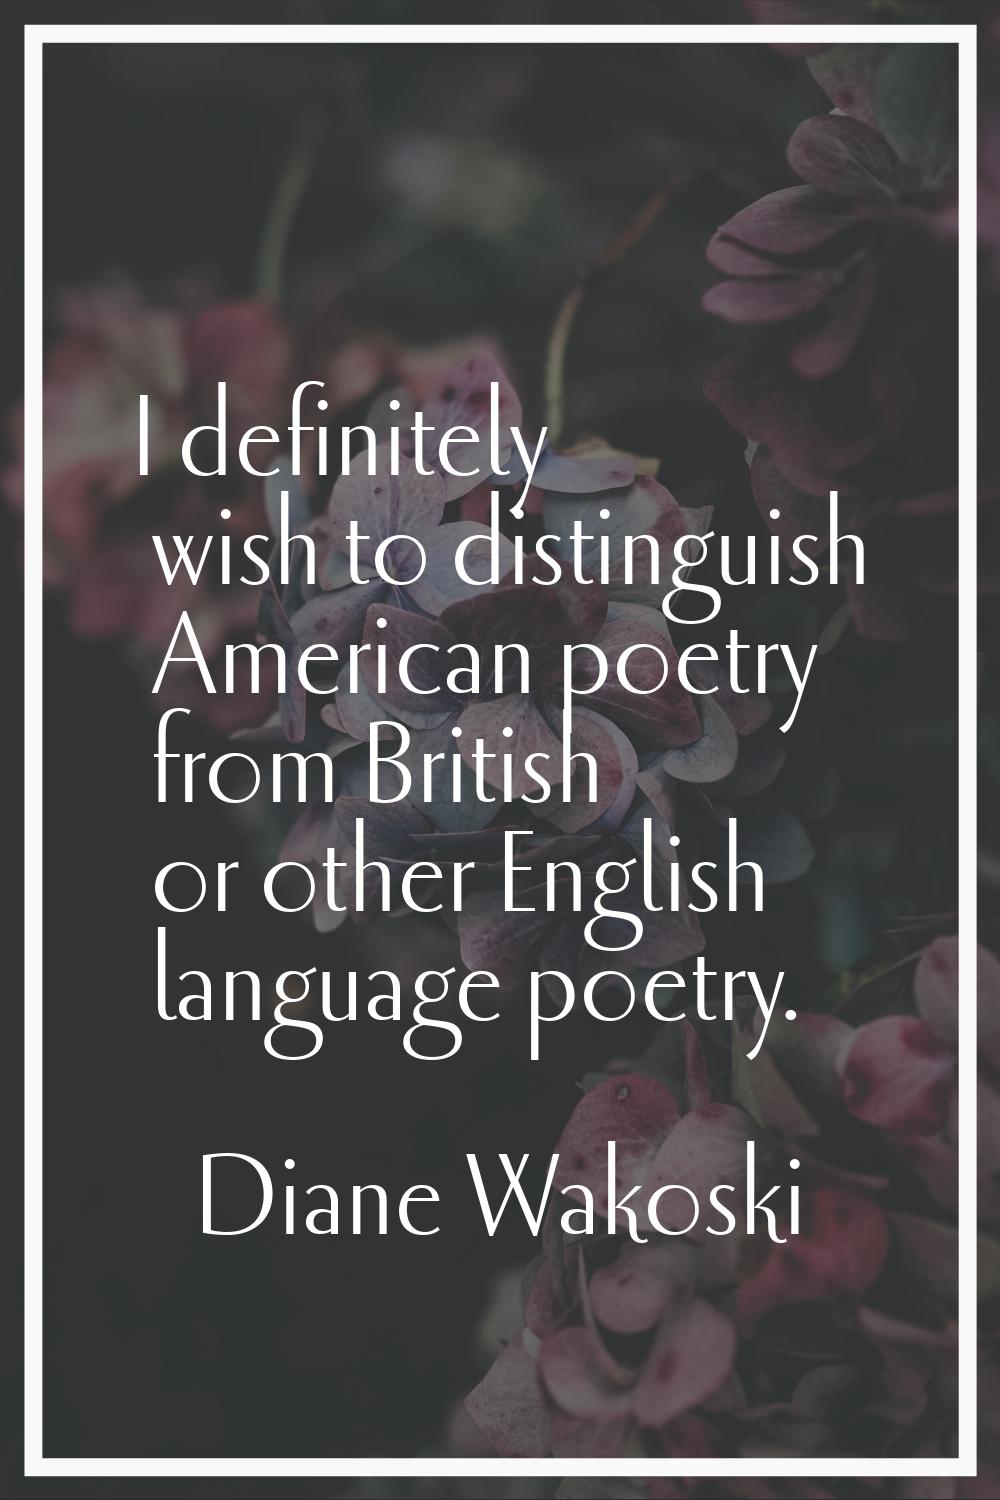 I definitely wish to distinguish American poetry from British or other English language poetry.